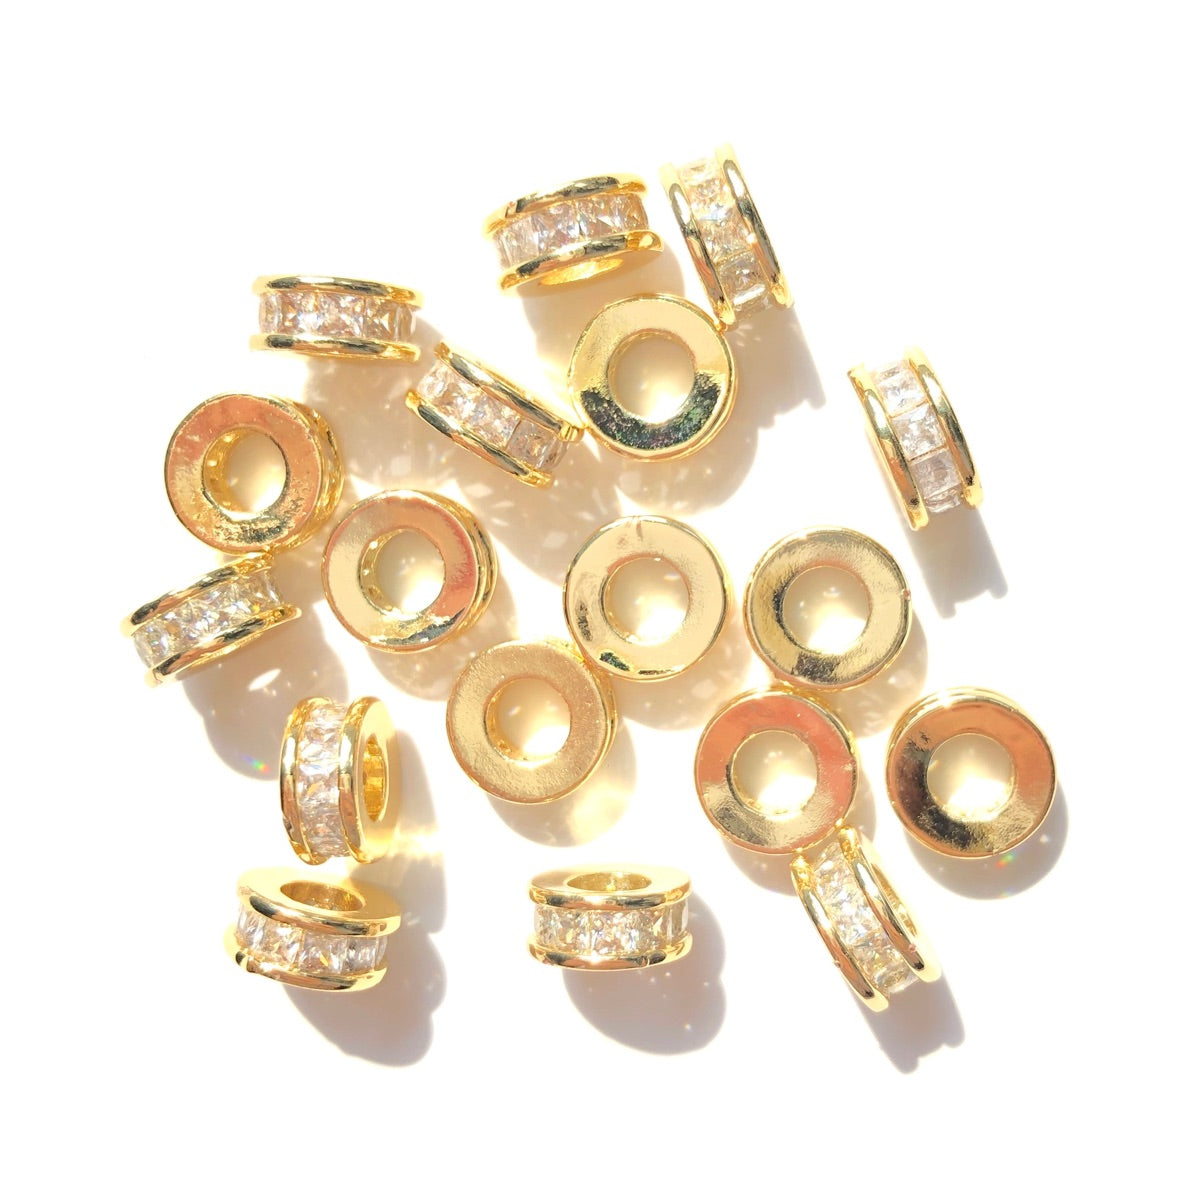 10 Grams (About 15pc) 8x3mm Faceted Rondelle Spacer Beads, Gold